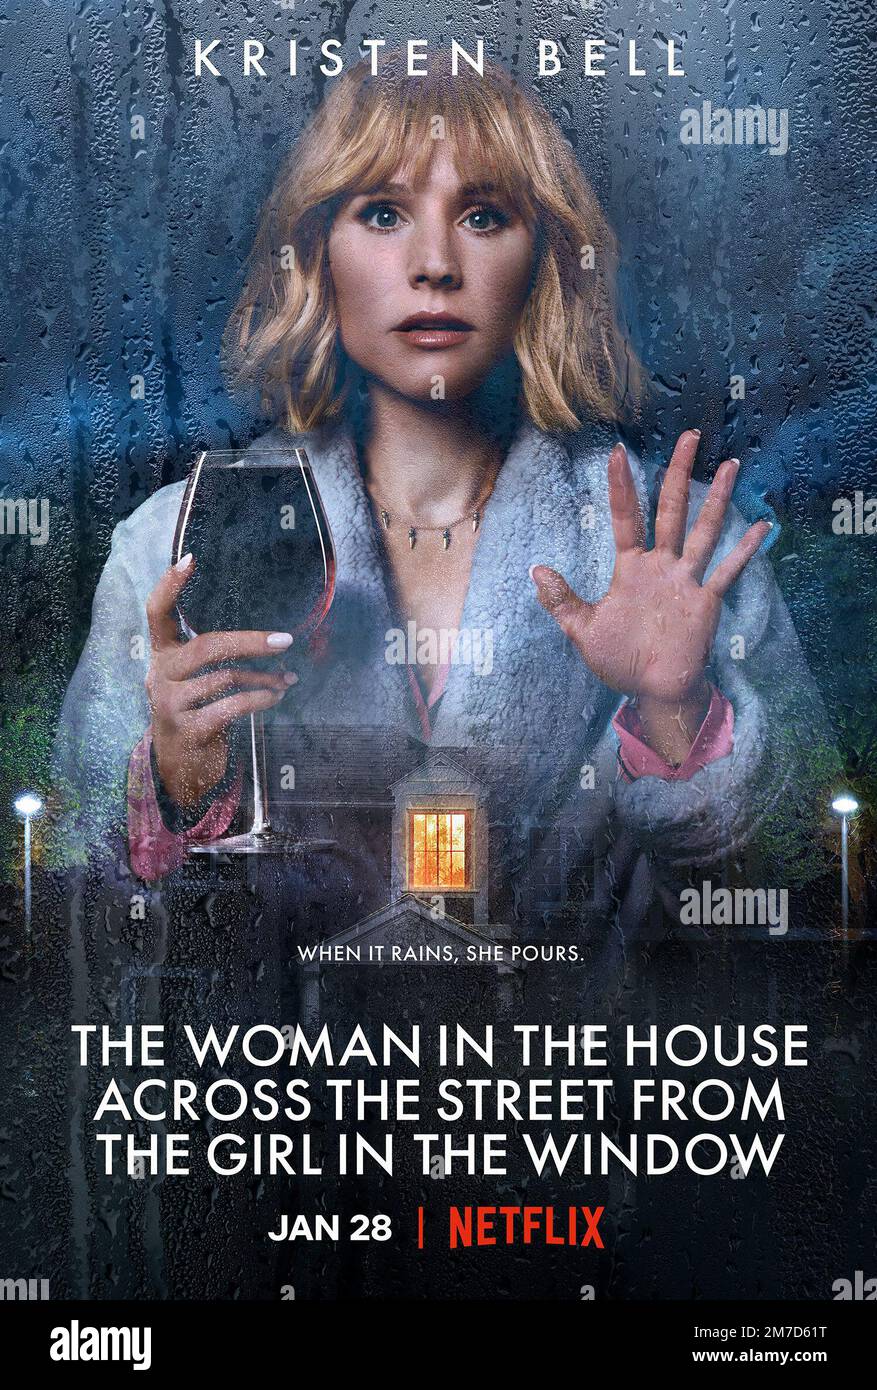 The Woman in the House Across the Street from the Girl in the Window poster  Kristen Bell poster Stock Photo